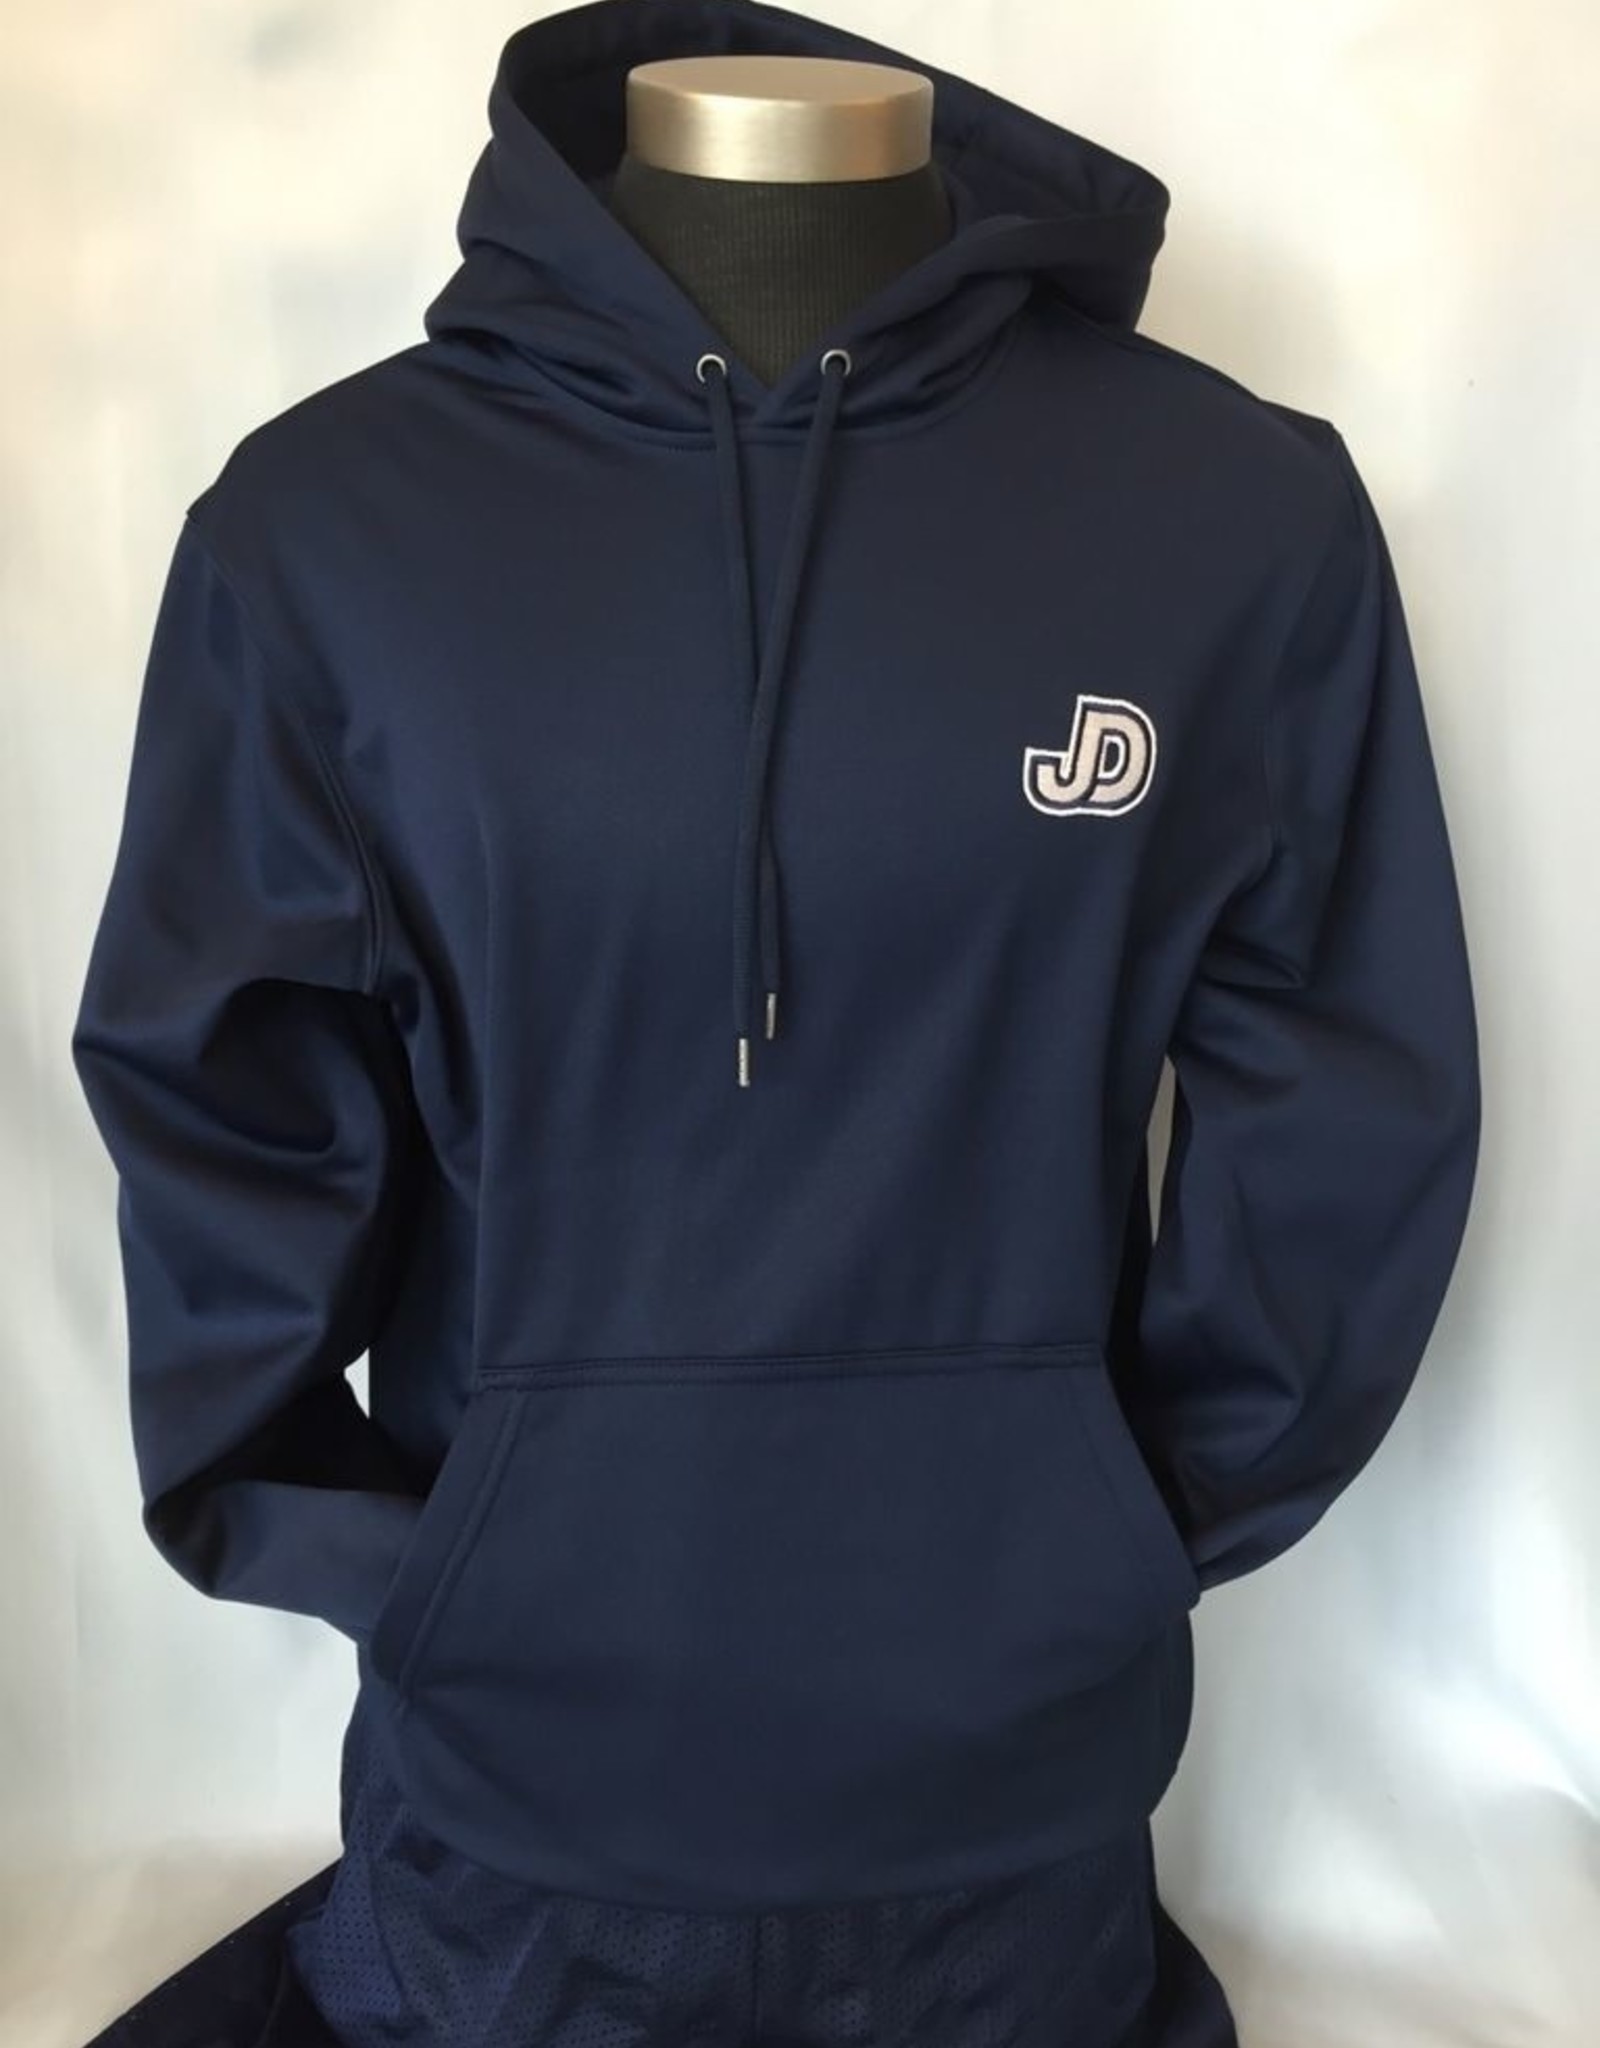 NON-UNIFORM Sweatshirt - Hooded Pullover, JD/eagle tackle twill applique center back, JD embry. left chest front